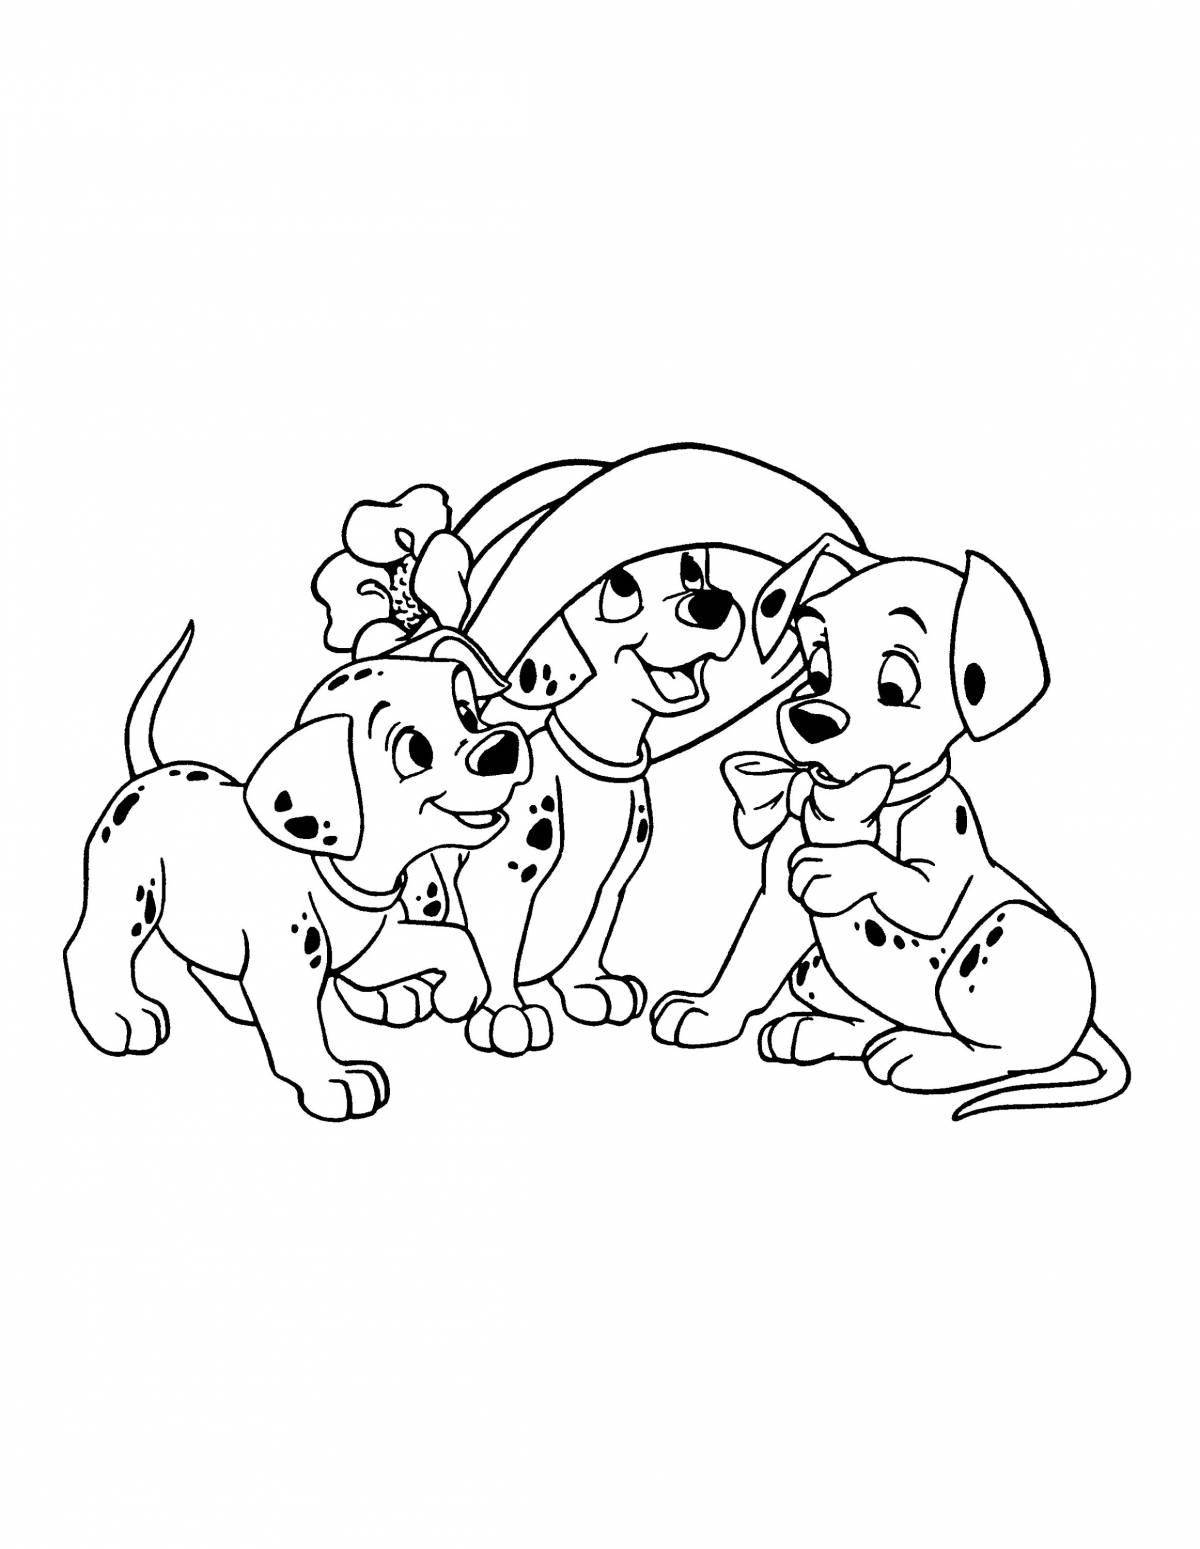 Coloring page of a sociable dog family